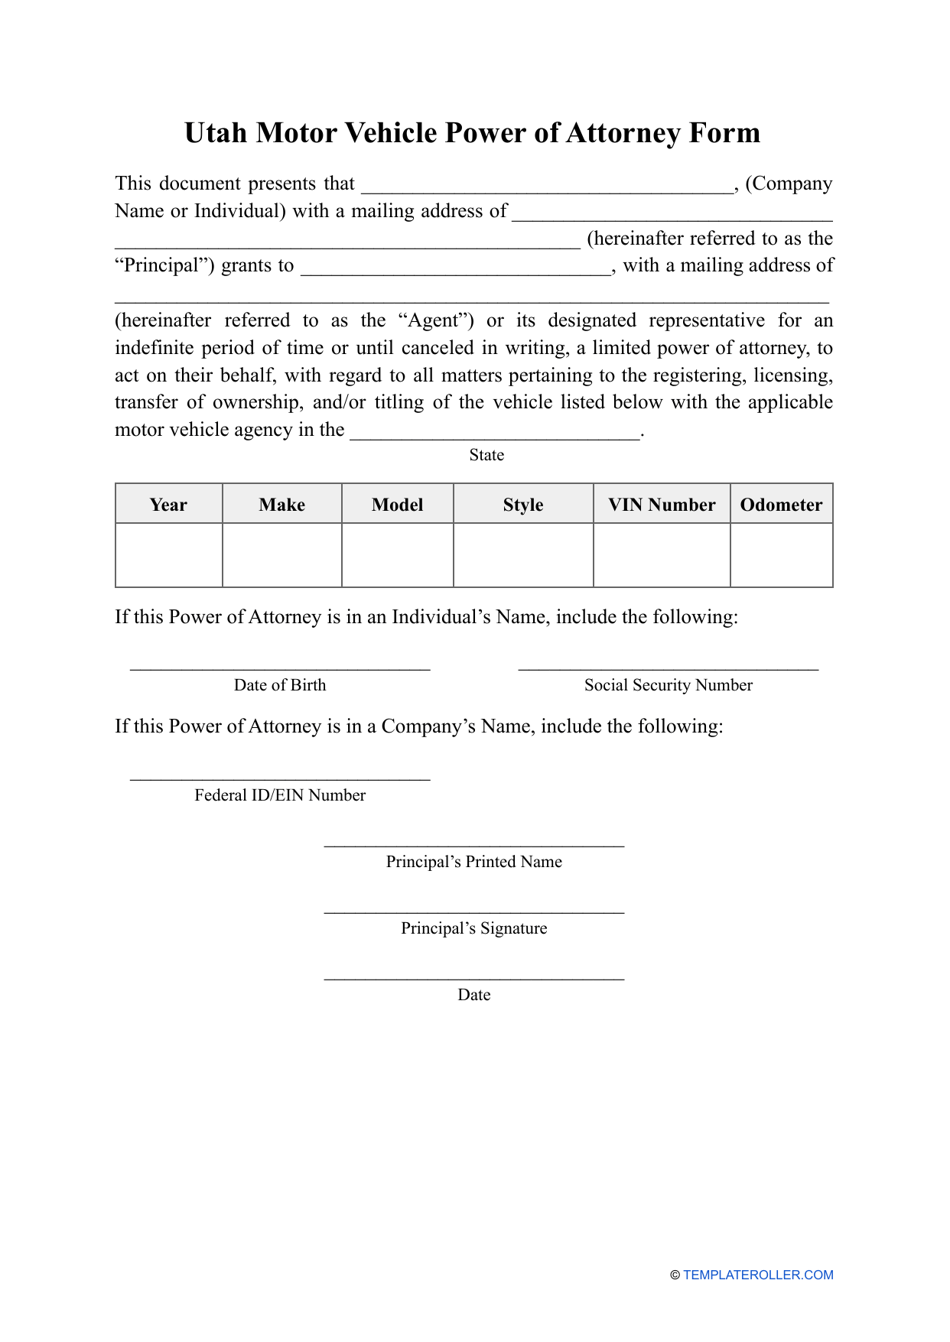 Motor Vehicle Power of Attorney Form - Utah, Page 1